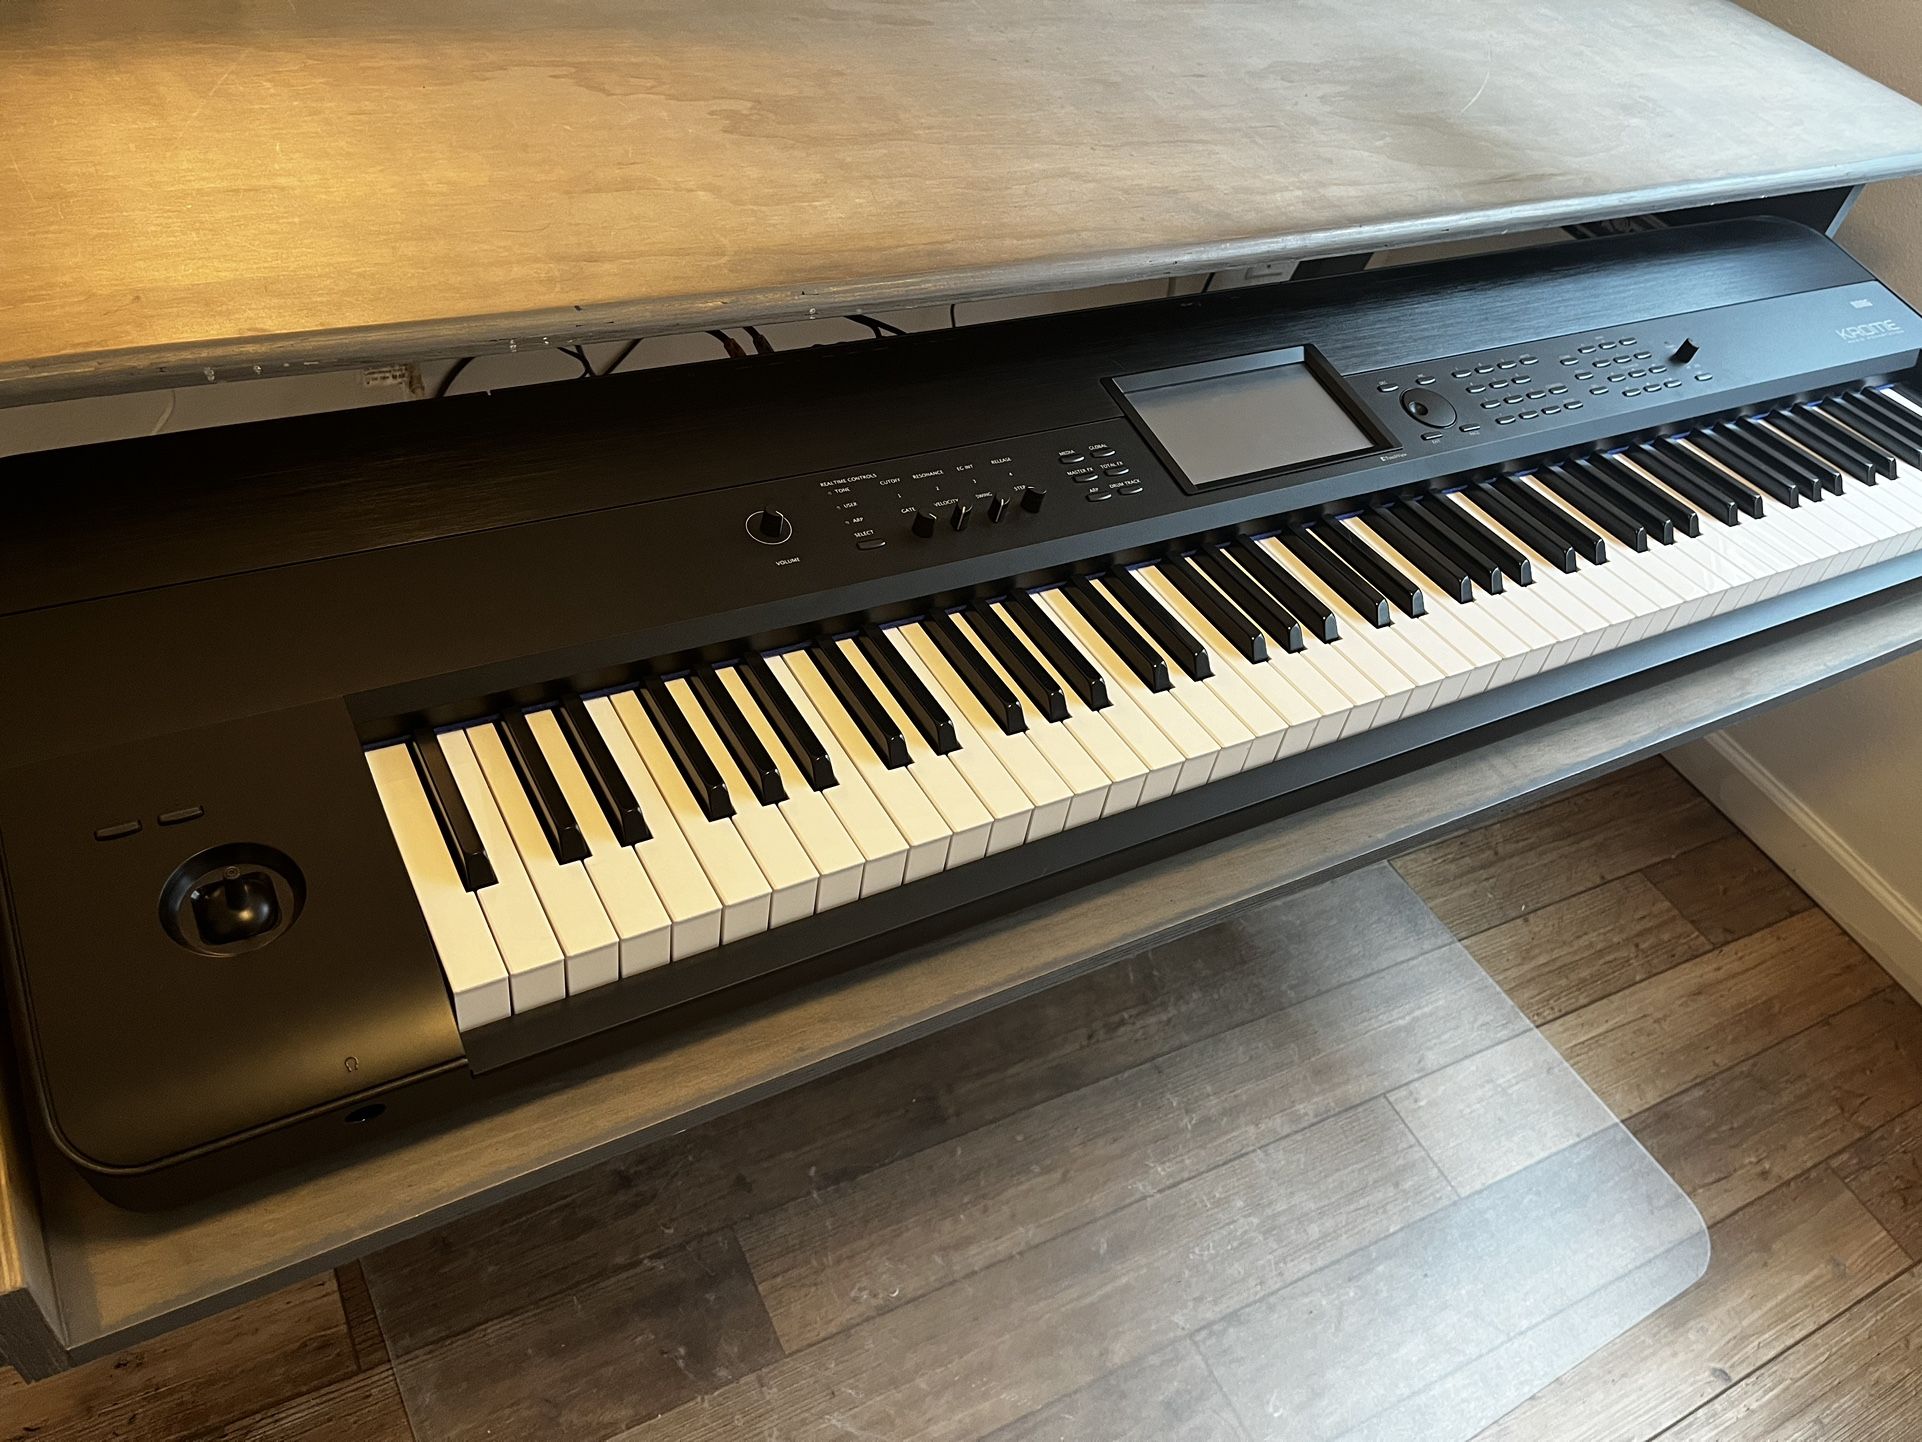 Korg Krome 88-Key Music Workstation with switch and damper pedals